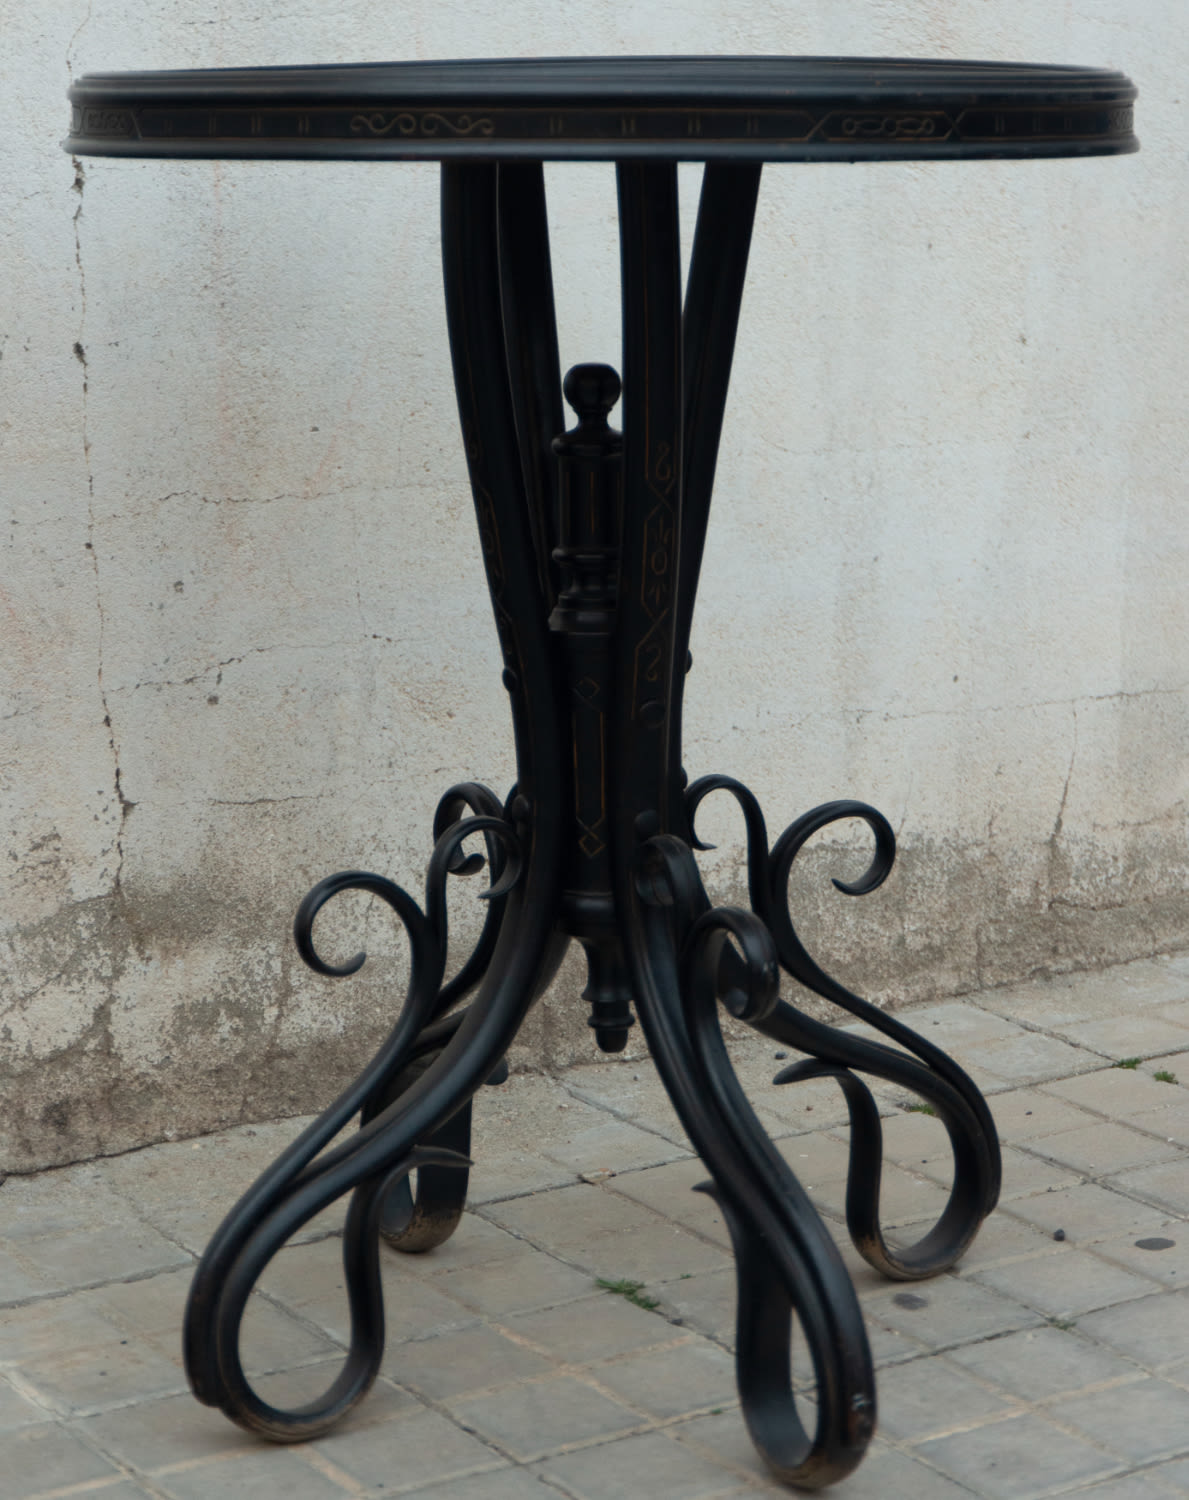 Art Nouveau table in ebonized wood, late 19th century - Image 4 of 4